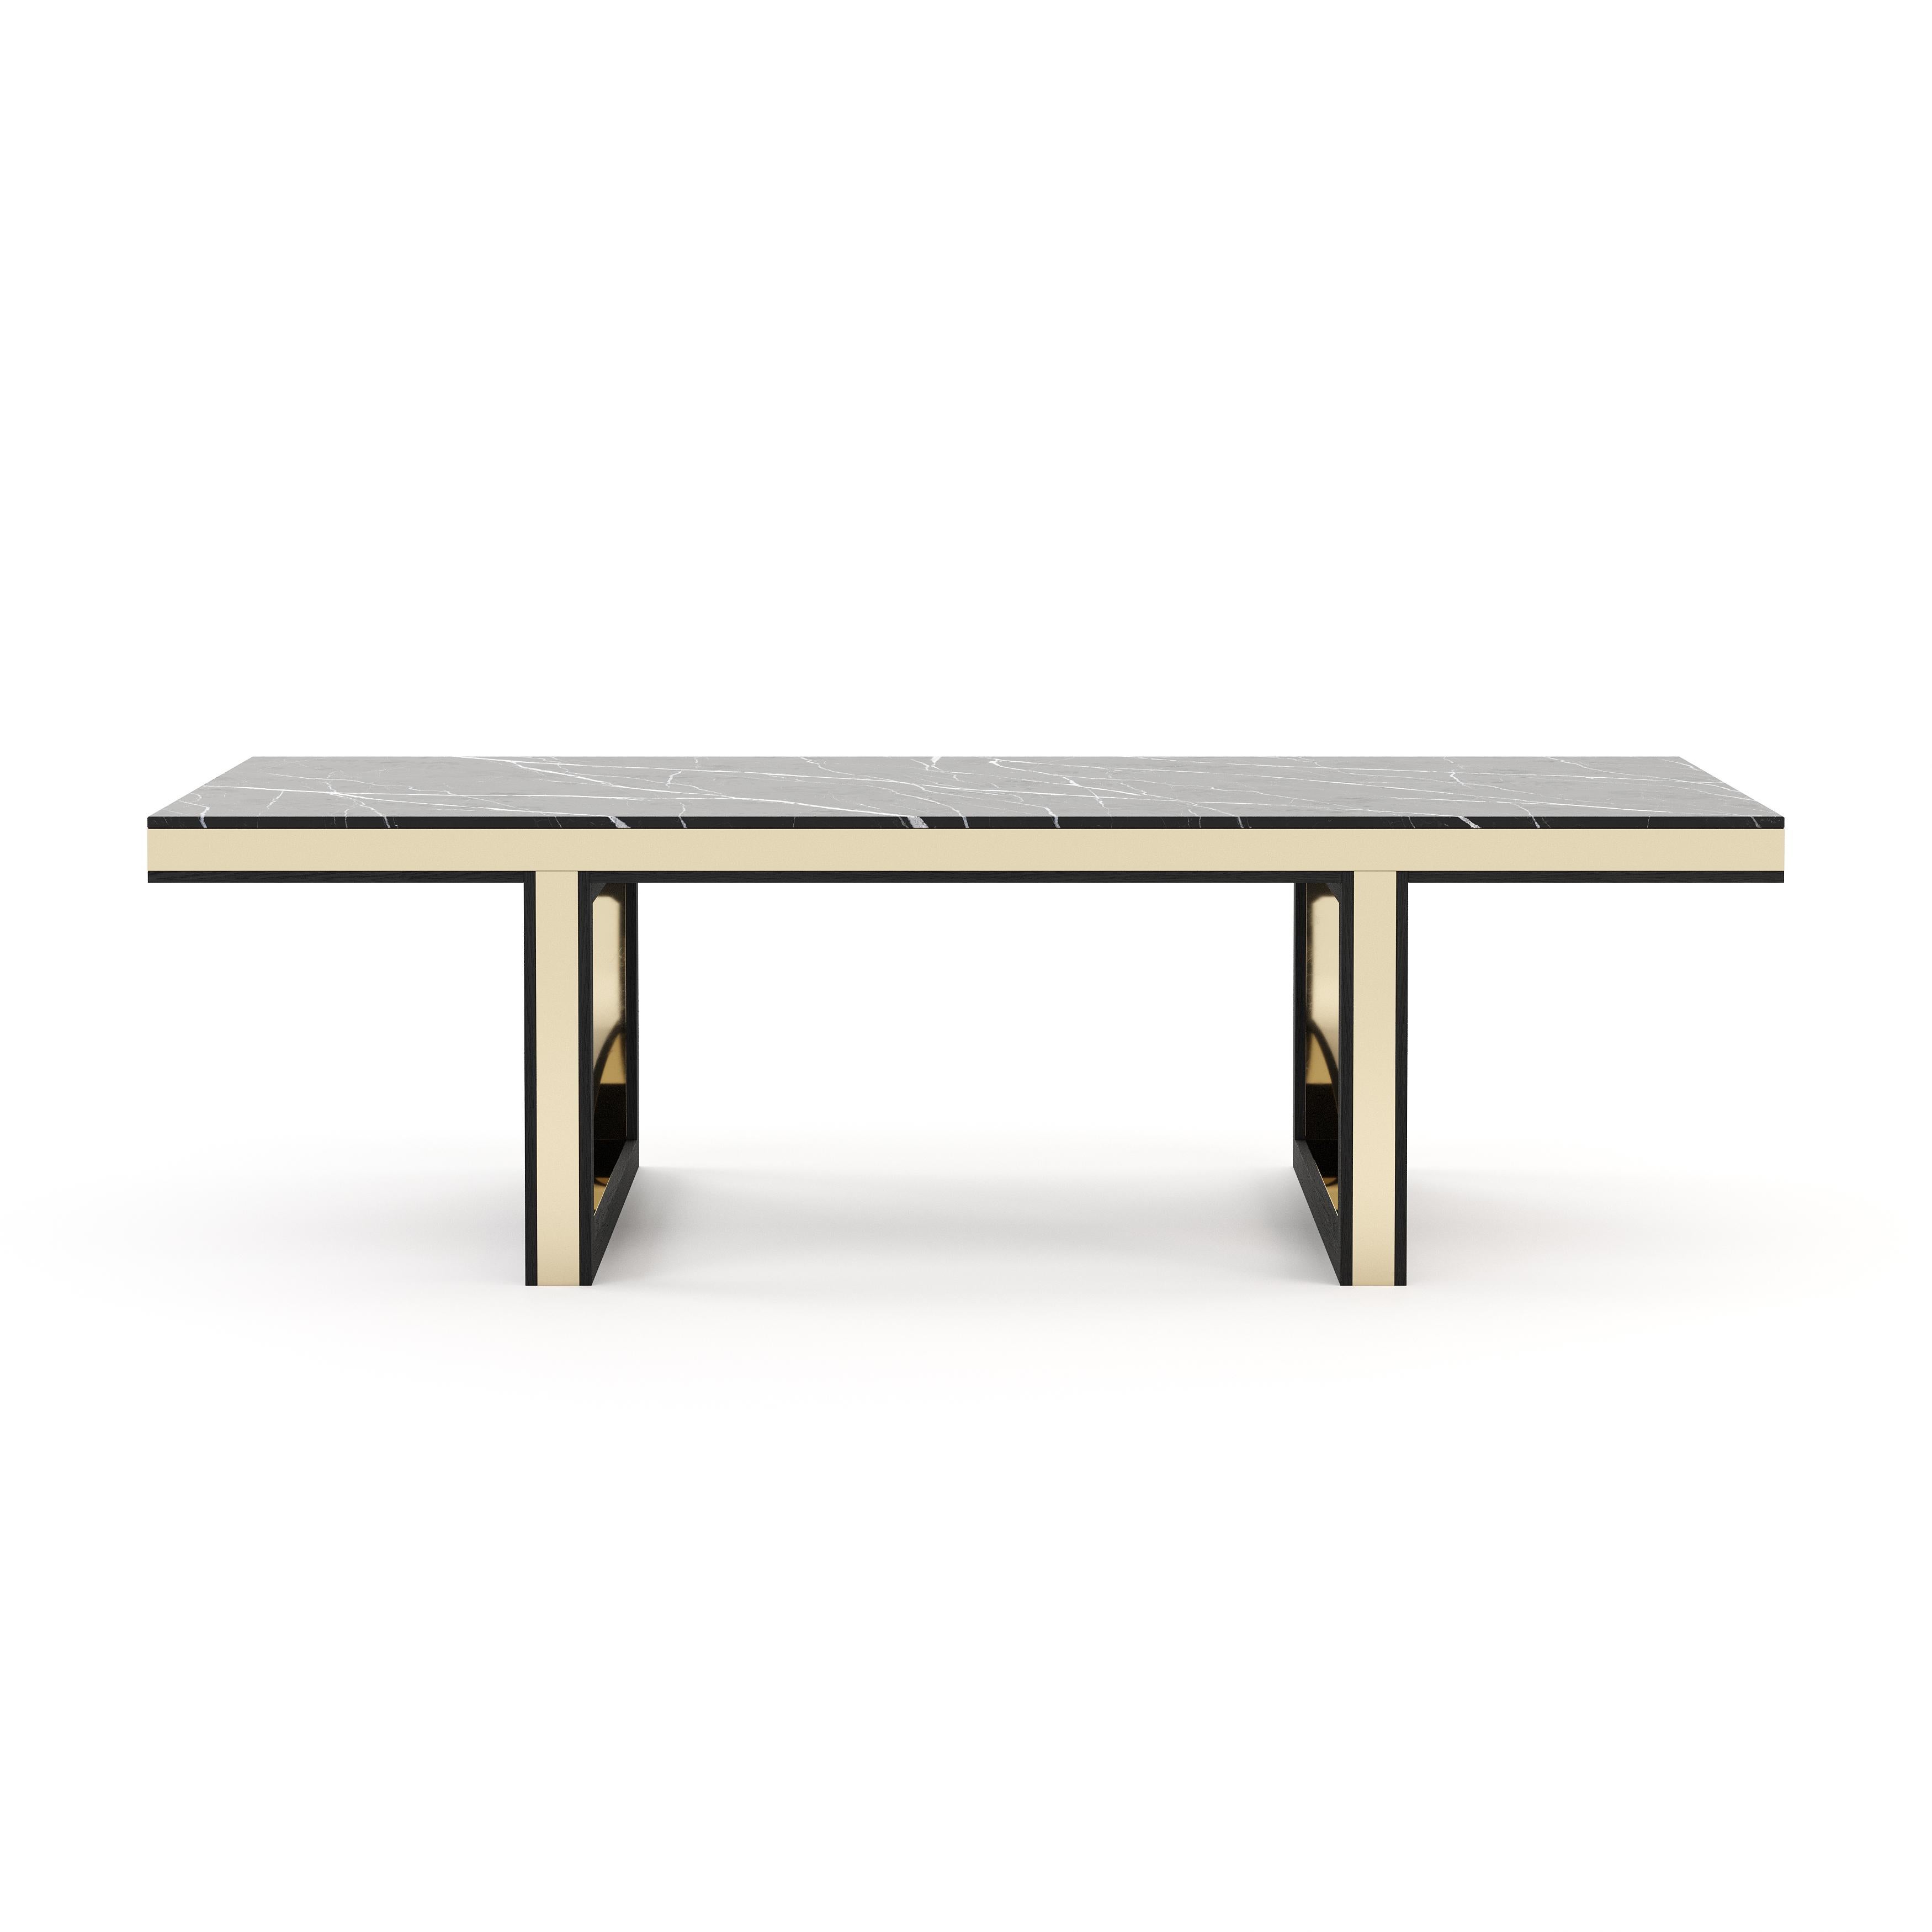 Pearl dining table features an intricate marble top and a sculptural base for adding glamour to any home design. Hand-sculpted from robust marble and wood, this is an impressive table with stainless steel details. A noble addition for majestic